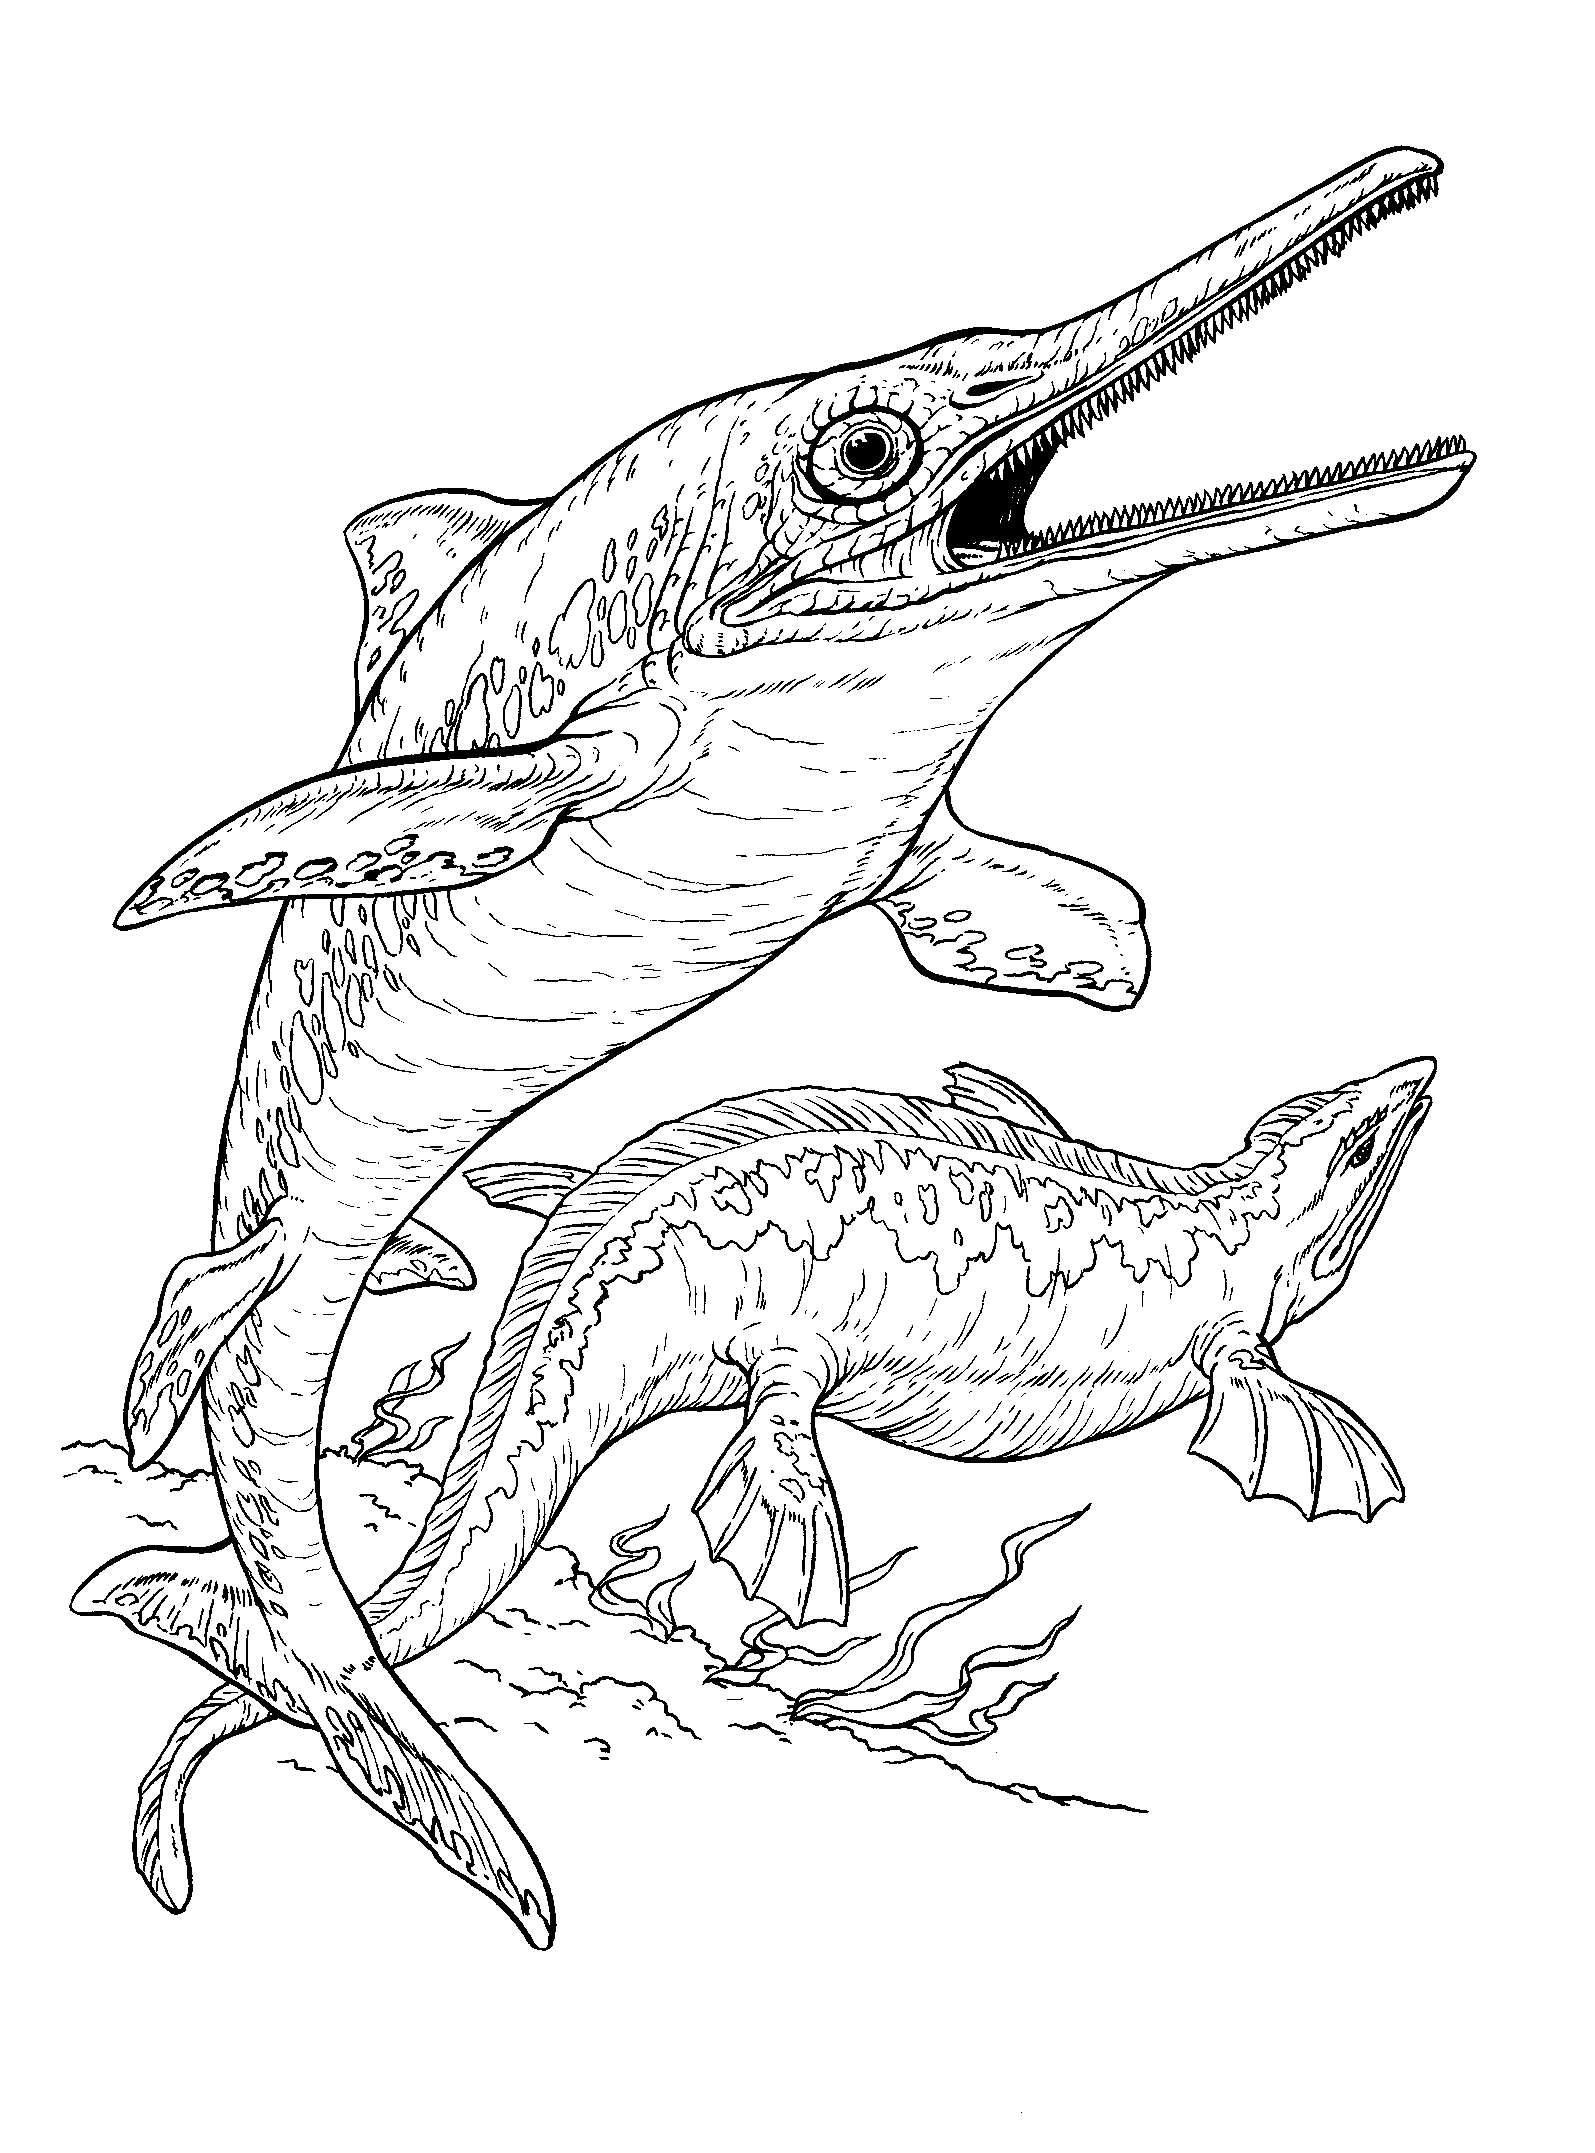 Coloring page - Ichthyosaur and plesiosaur